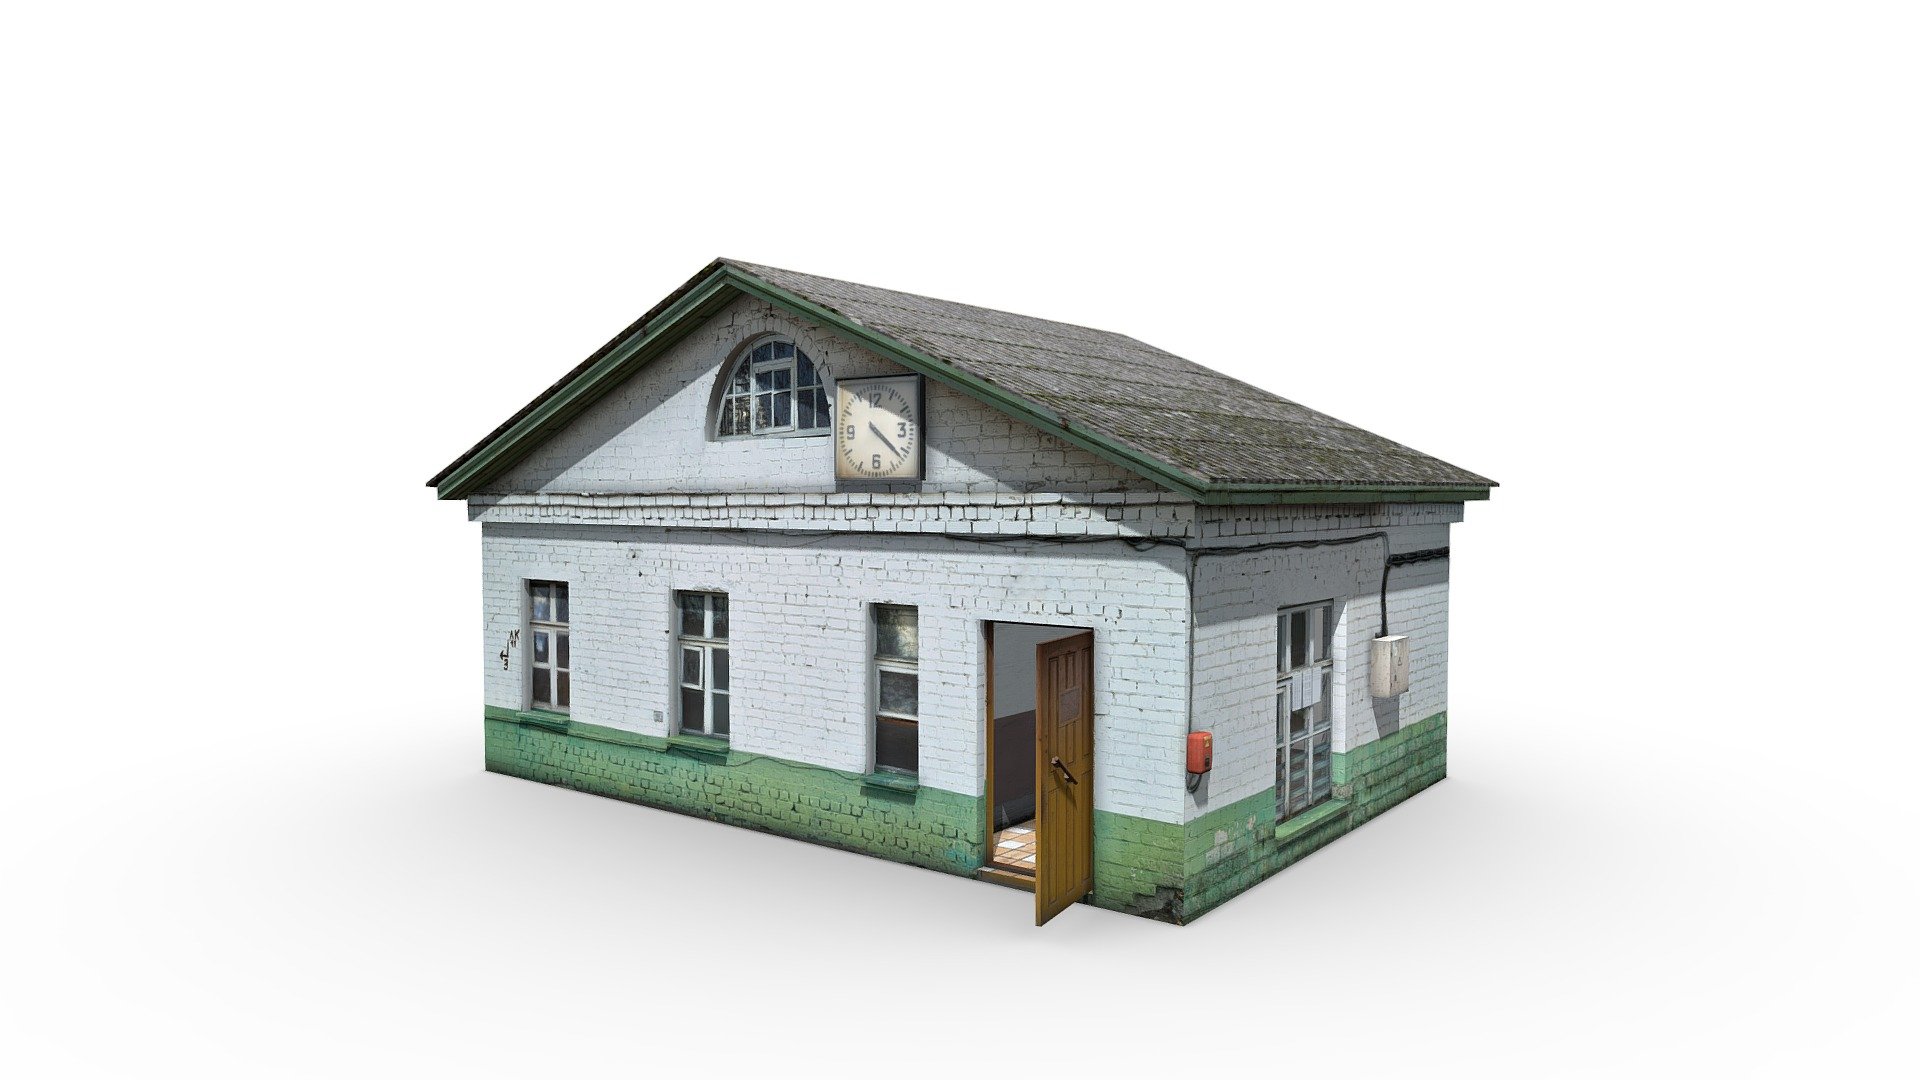 This is an old Soviet checkpoint that exists in factories and plants. Inside there is an office with a window through which the guard checks the documents, as well as an additional room for a warehouse / archive or a rest room.
Low poly 3D model of the Russian environment from Loginovsky Denis (denlog). This and my other models were created in 3ds max version 2017. Textures included are also created from mi own photos and free images from the Internet. My group is in Contact https://vk.com/club159607022 - Old Soviet checkpoint - 3D model by Denis Loginovskiy (@denlog2) 3d model